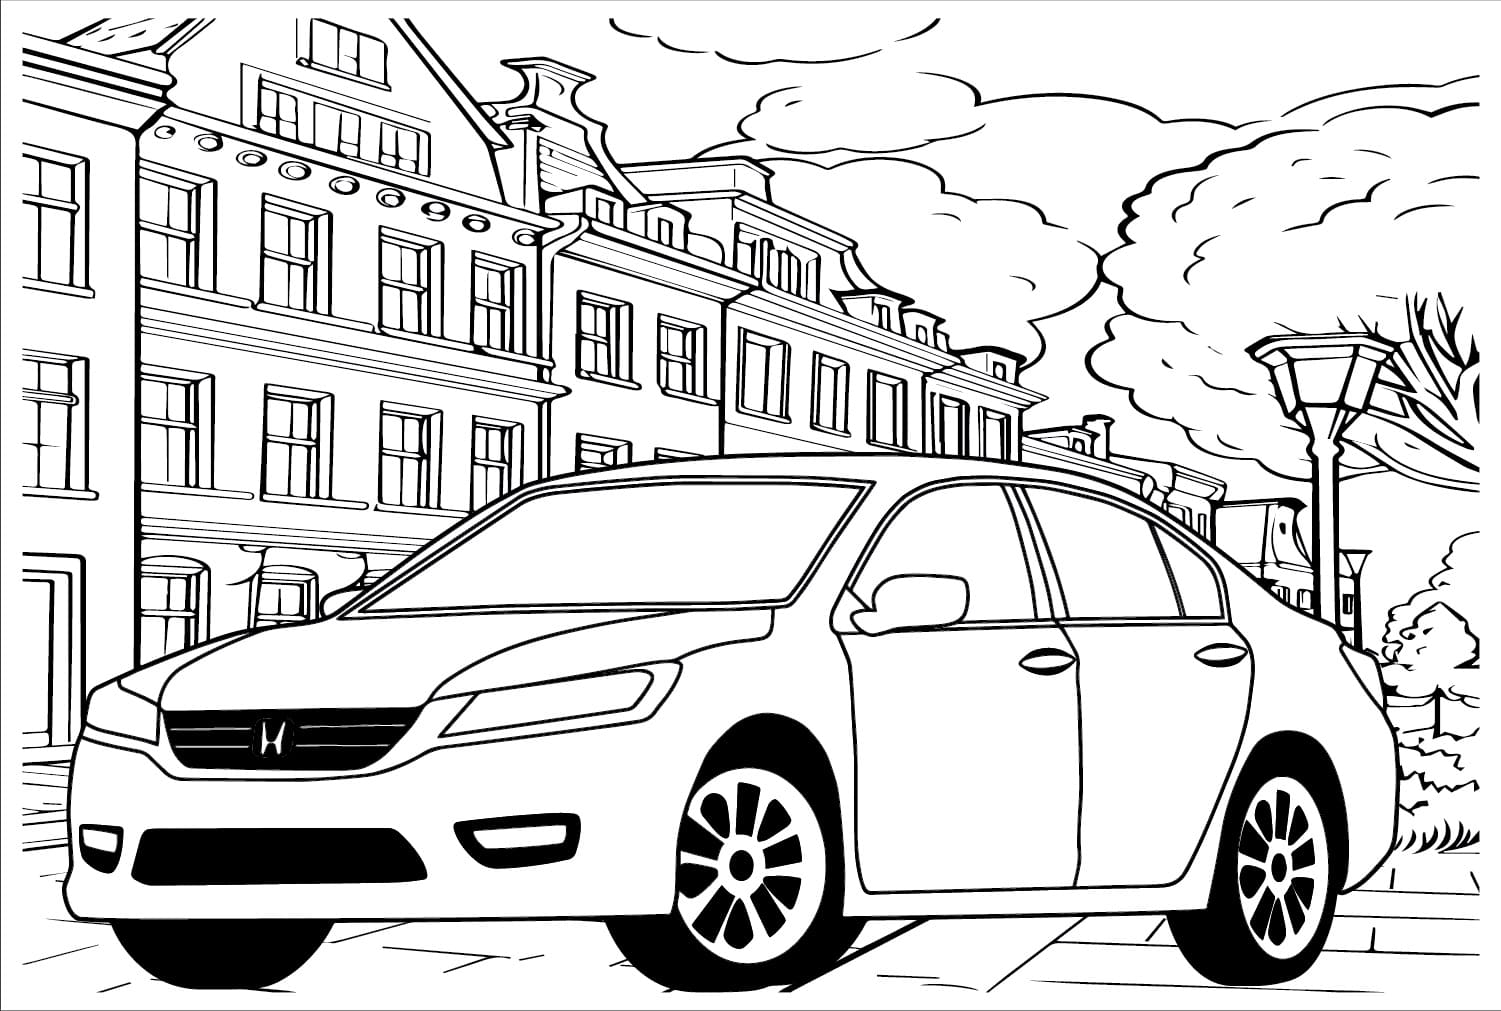 Honda Car coloring page - Download, Print or Color Online for Free